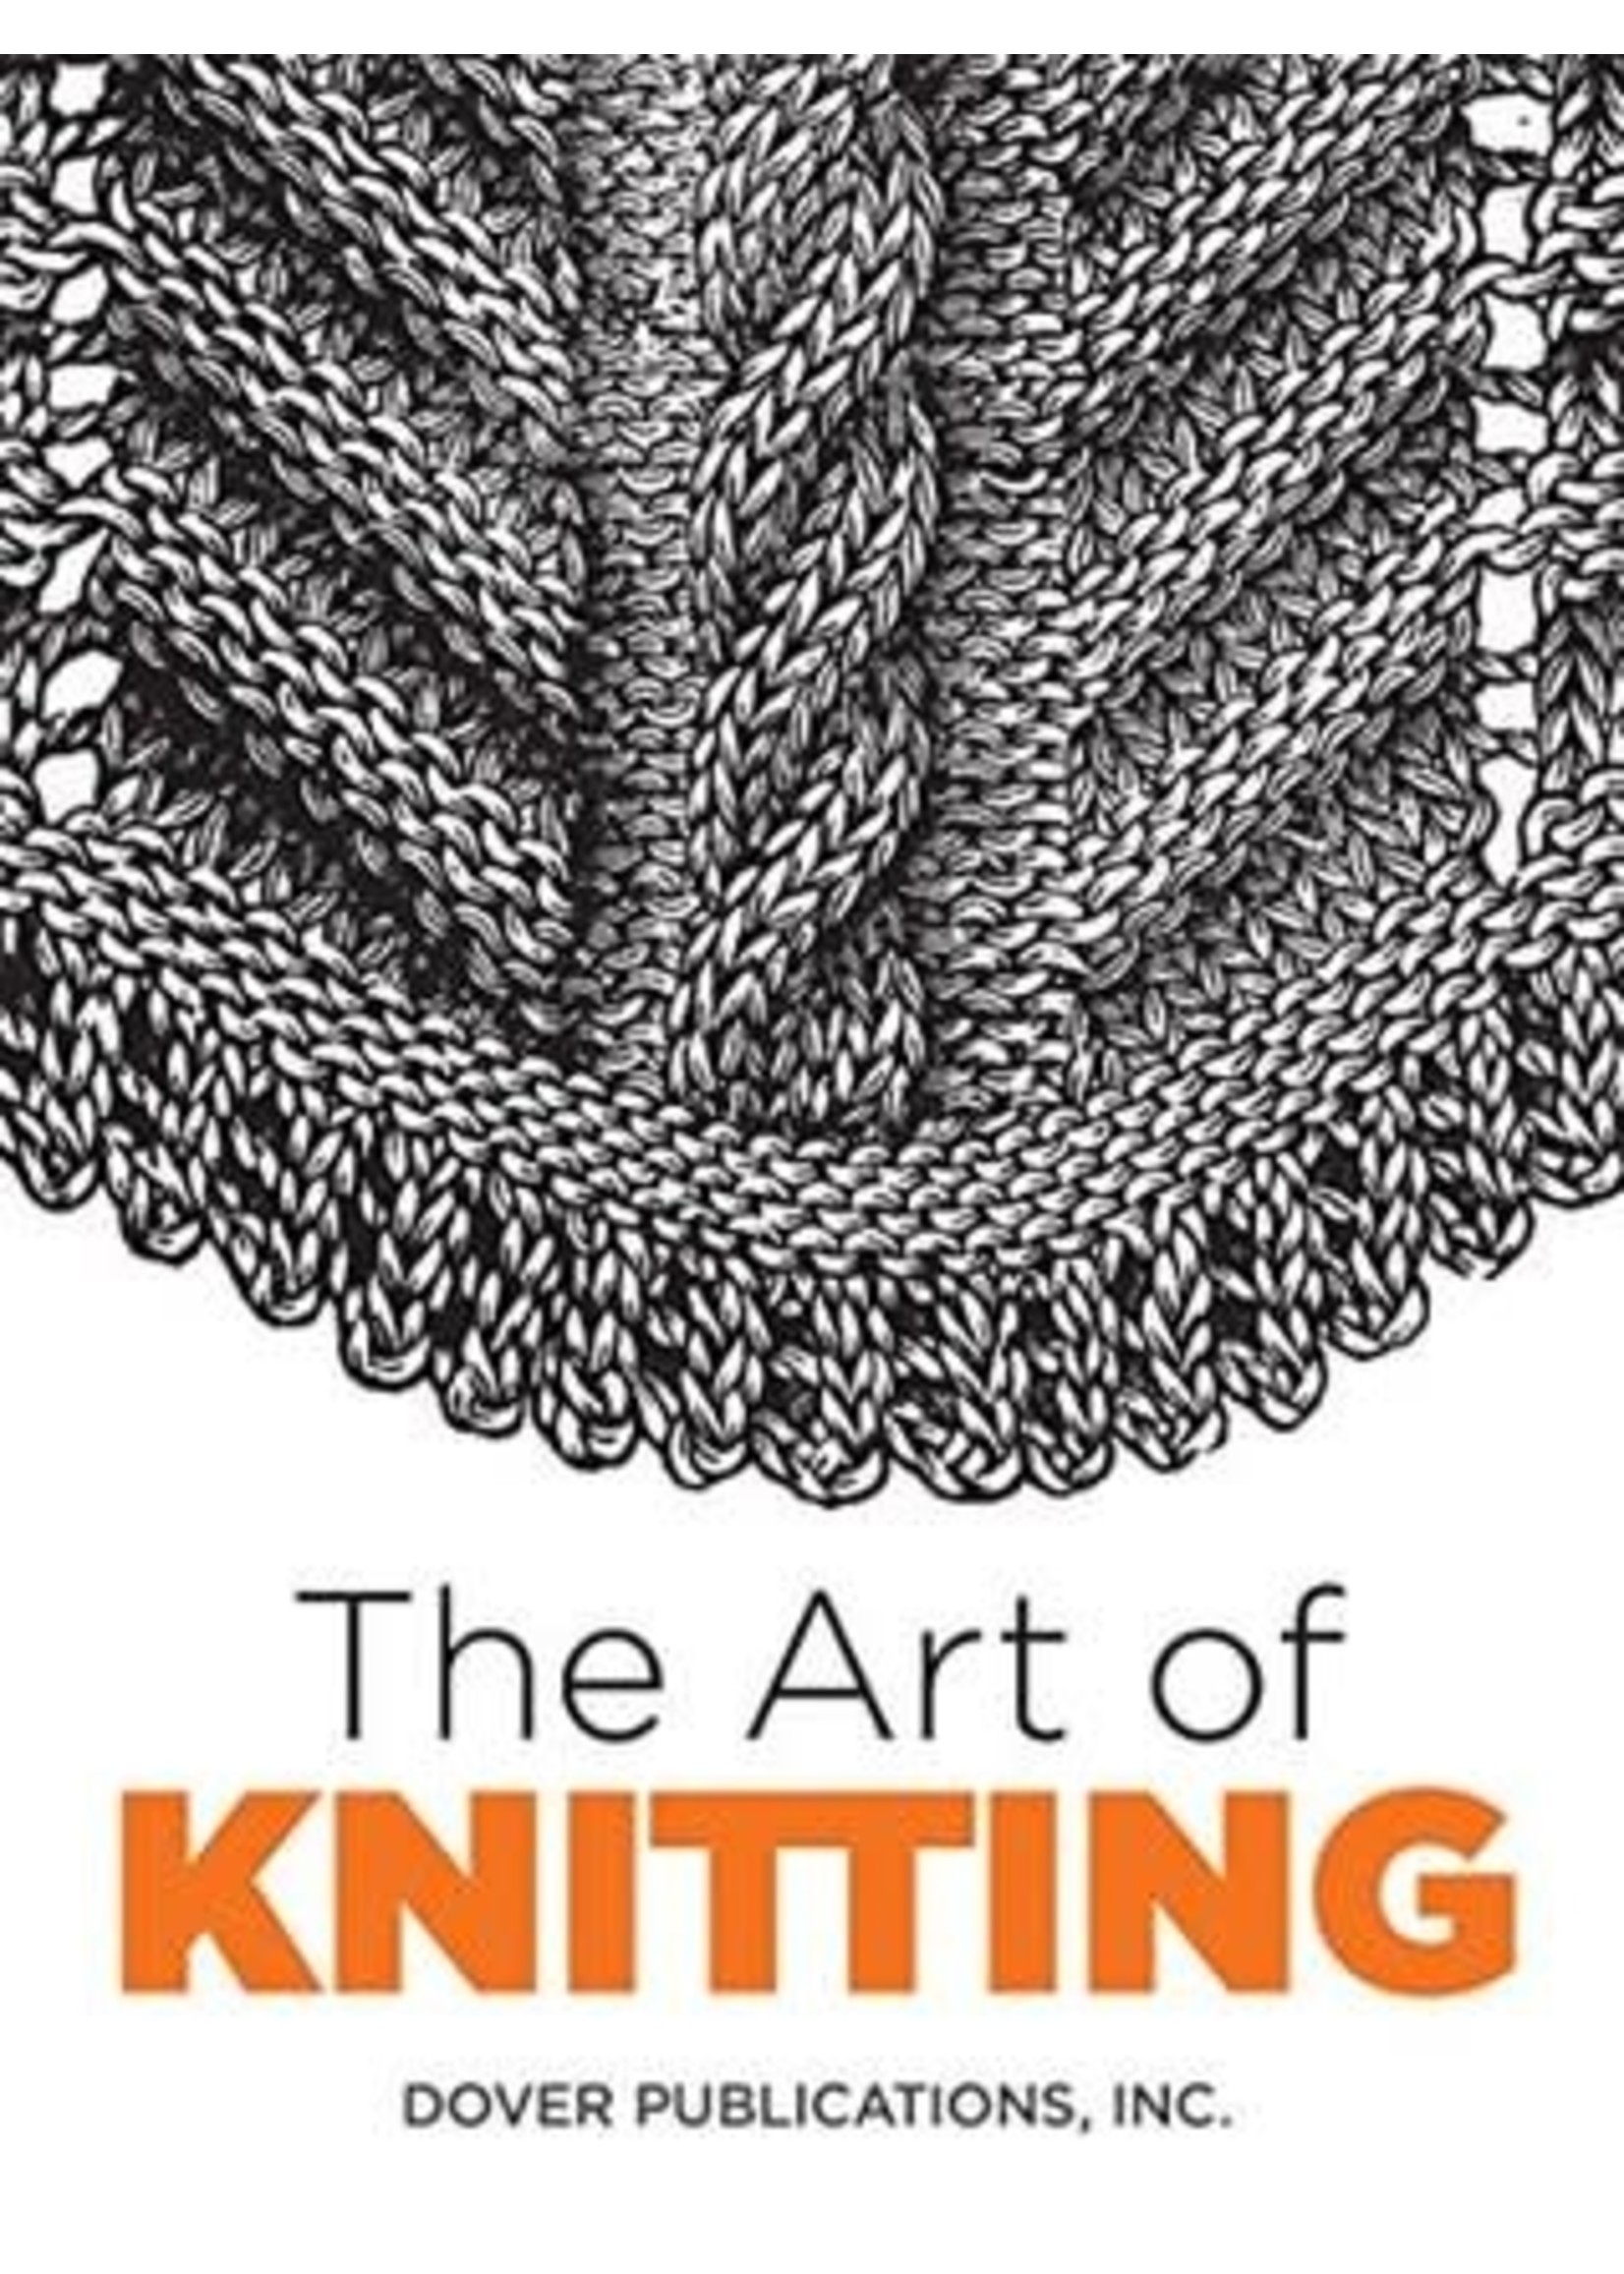 The Art of Knitting by Dover Publications Inc., Butterick Publishing Co.